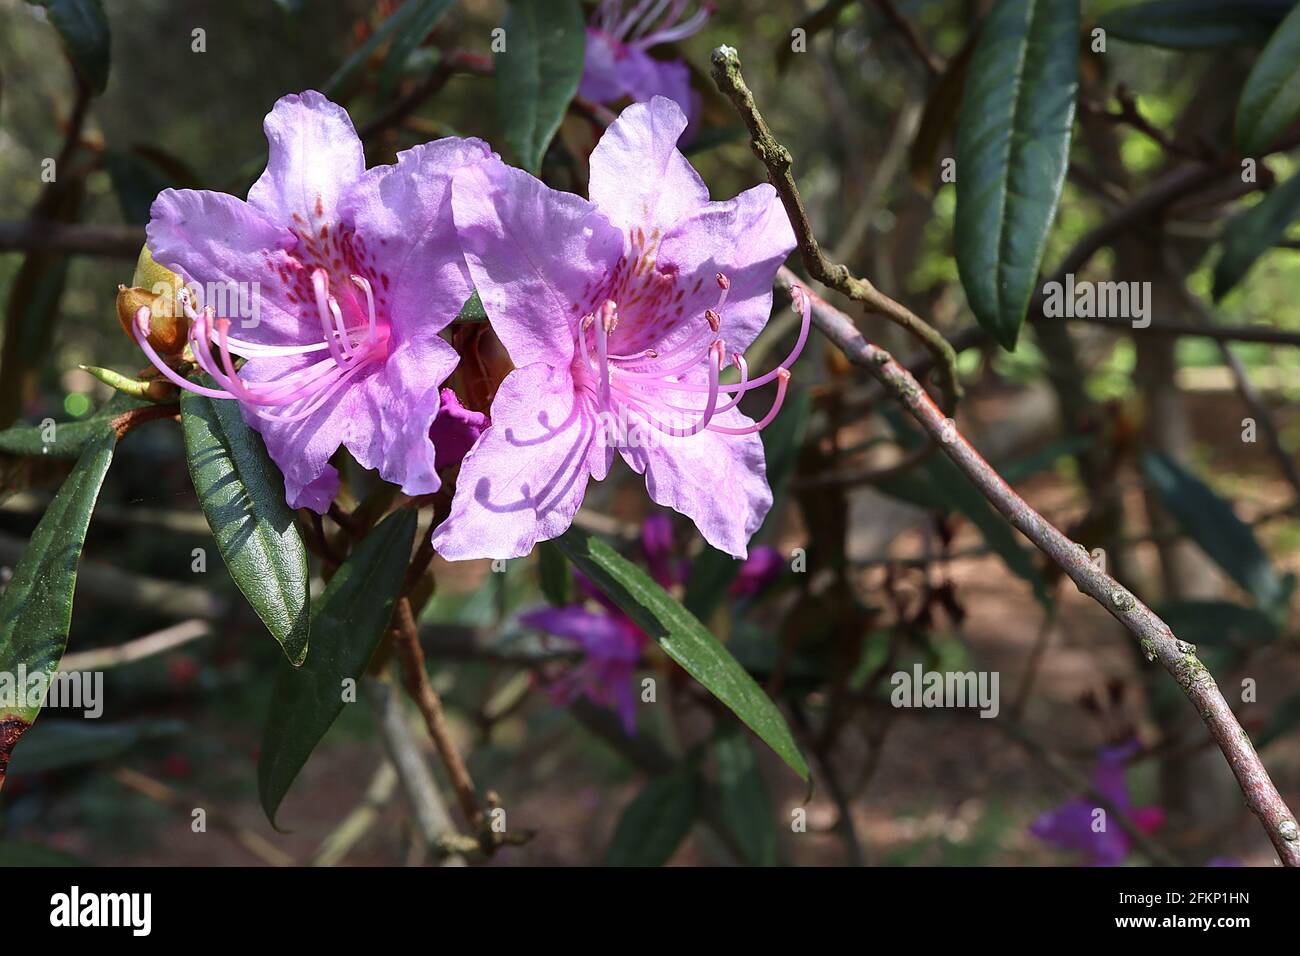 Rhododendron augustinii ‘Electra’ Violet blue flowers with green blotch, dark green elliptic leaves,  May, England, UK Stock Photo